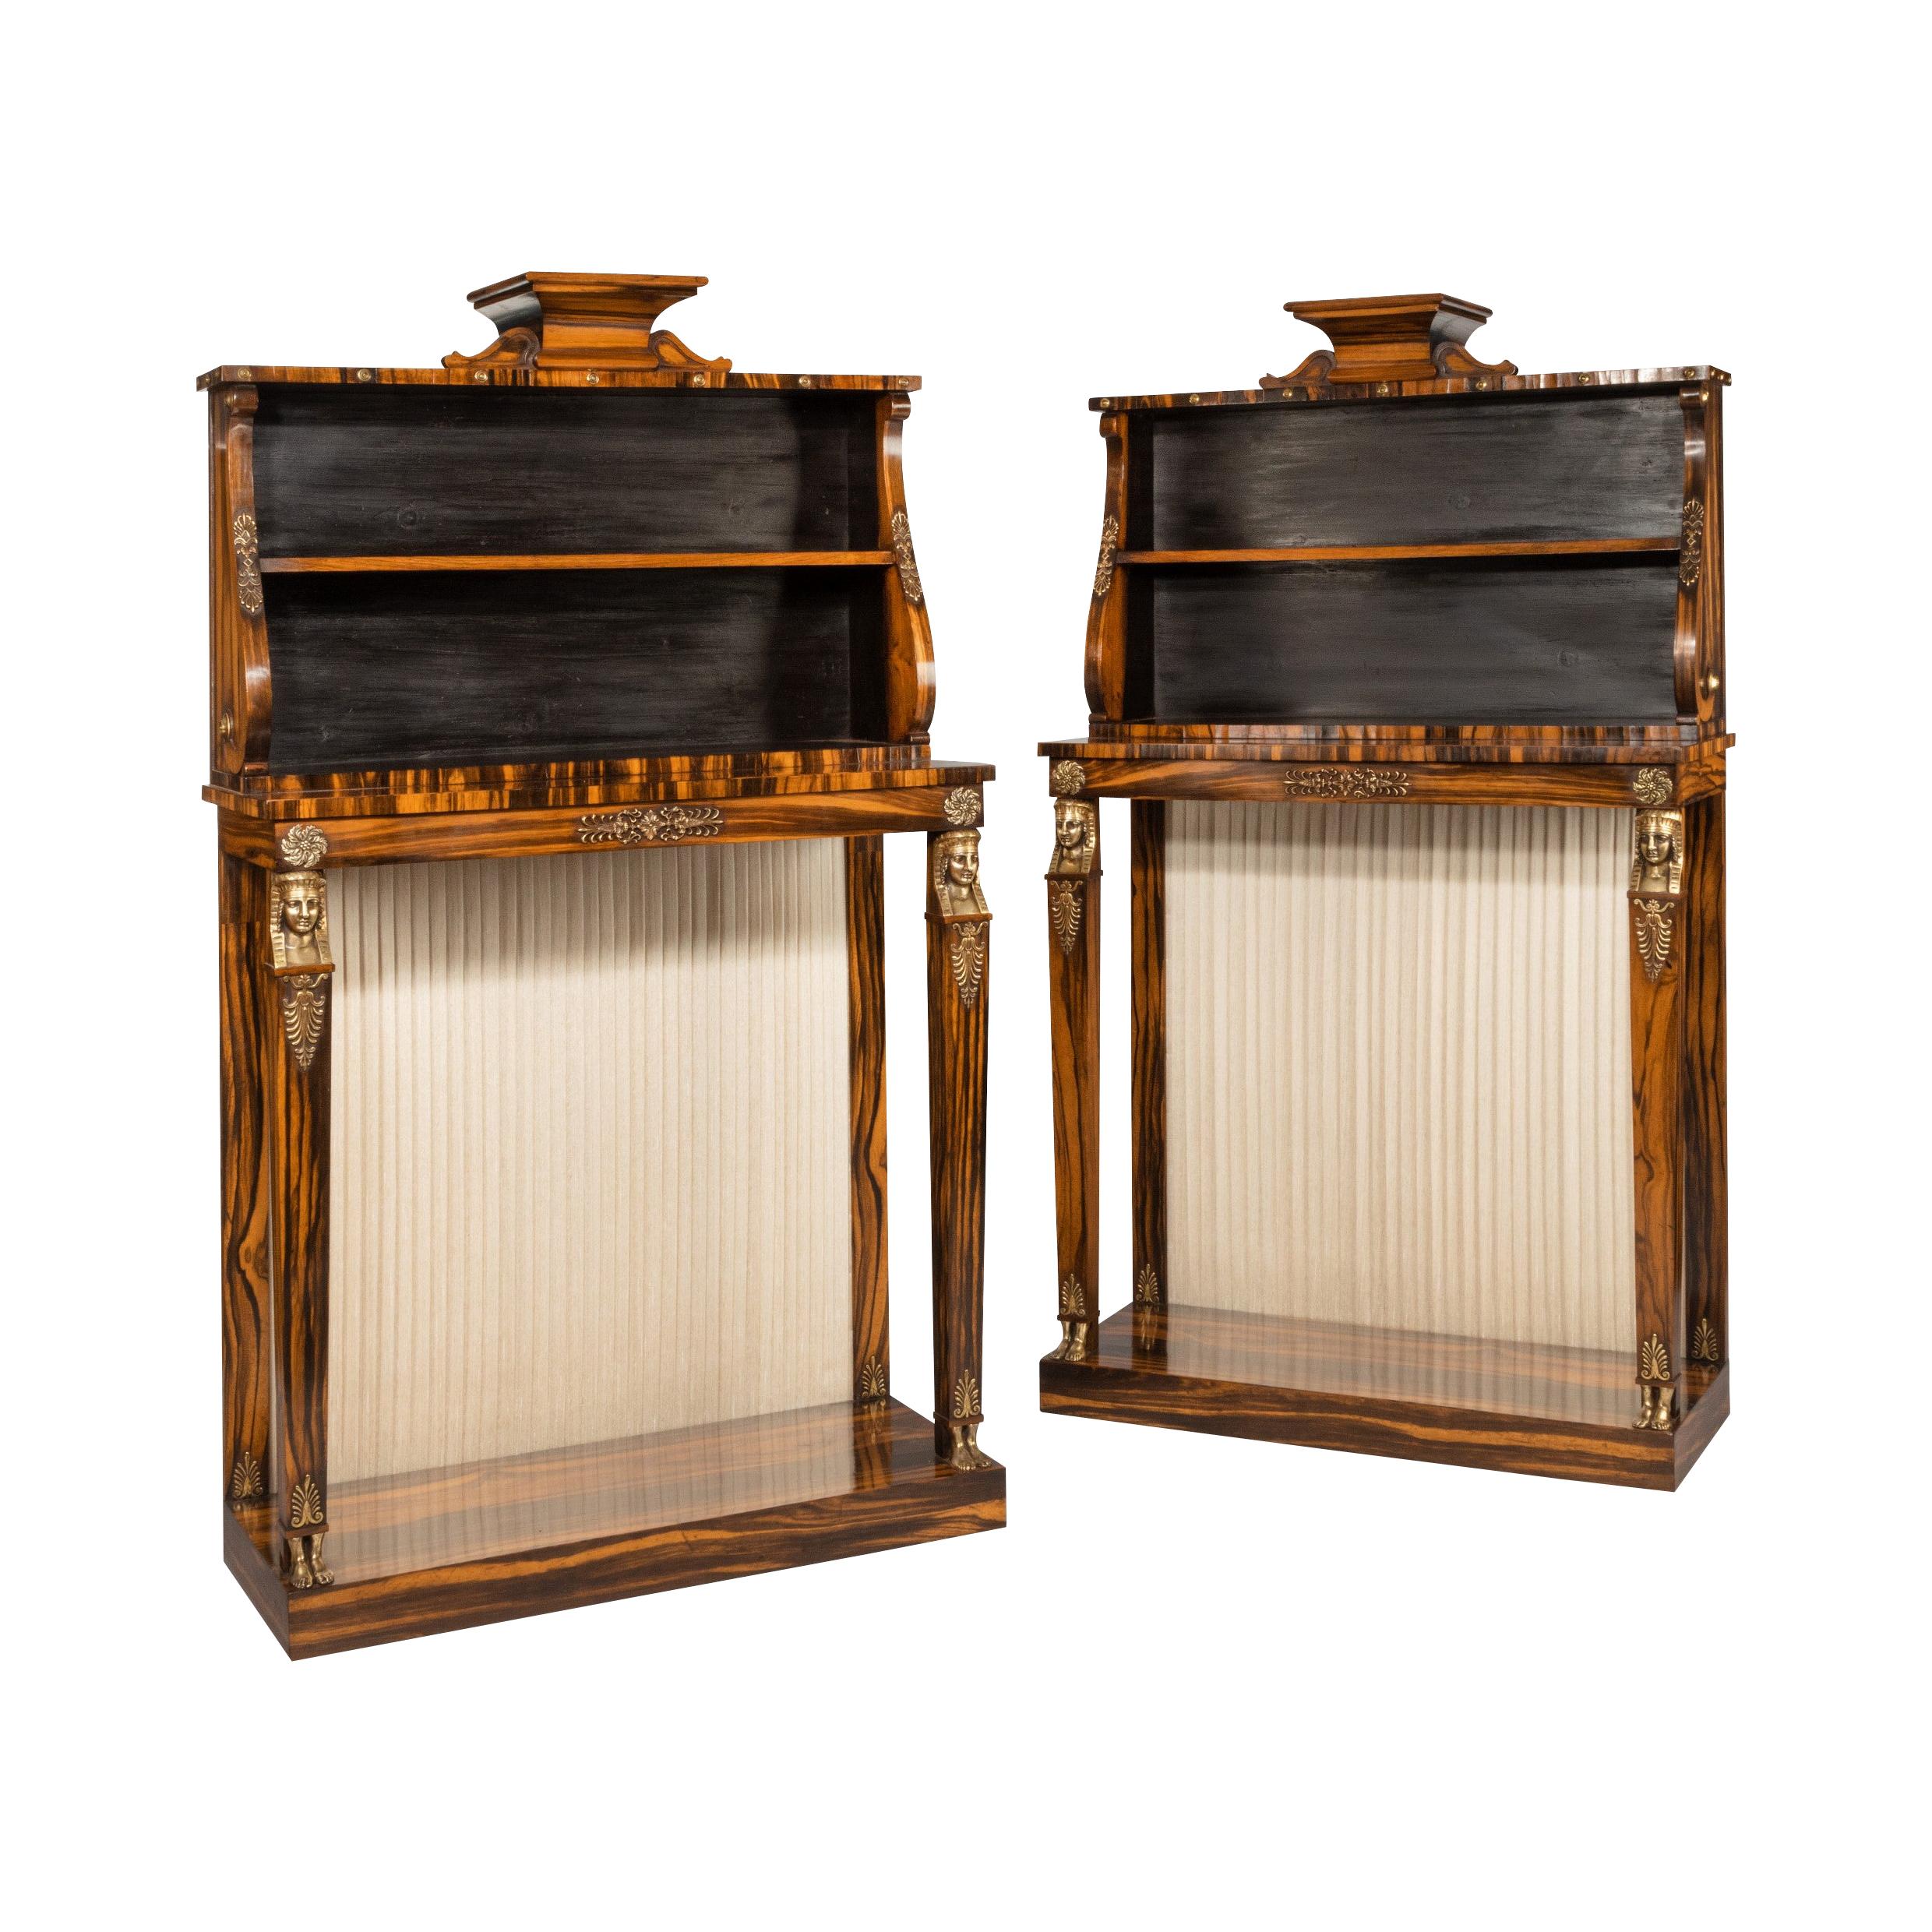 Pair of High Regency Coromandel and Ormolu Bookcase Console Tables